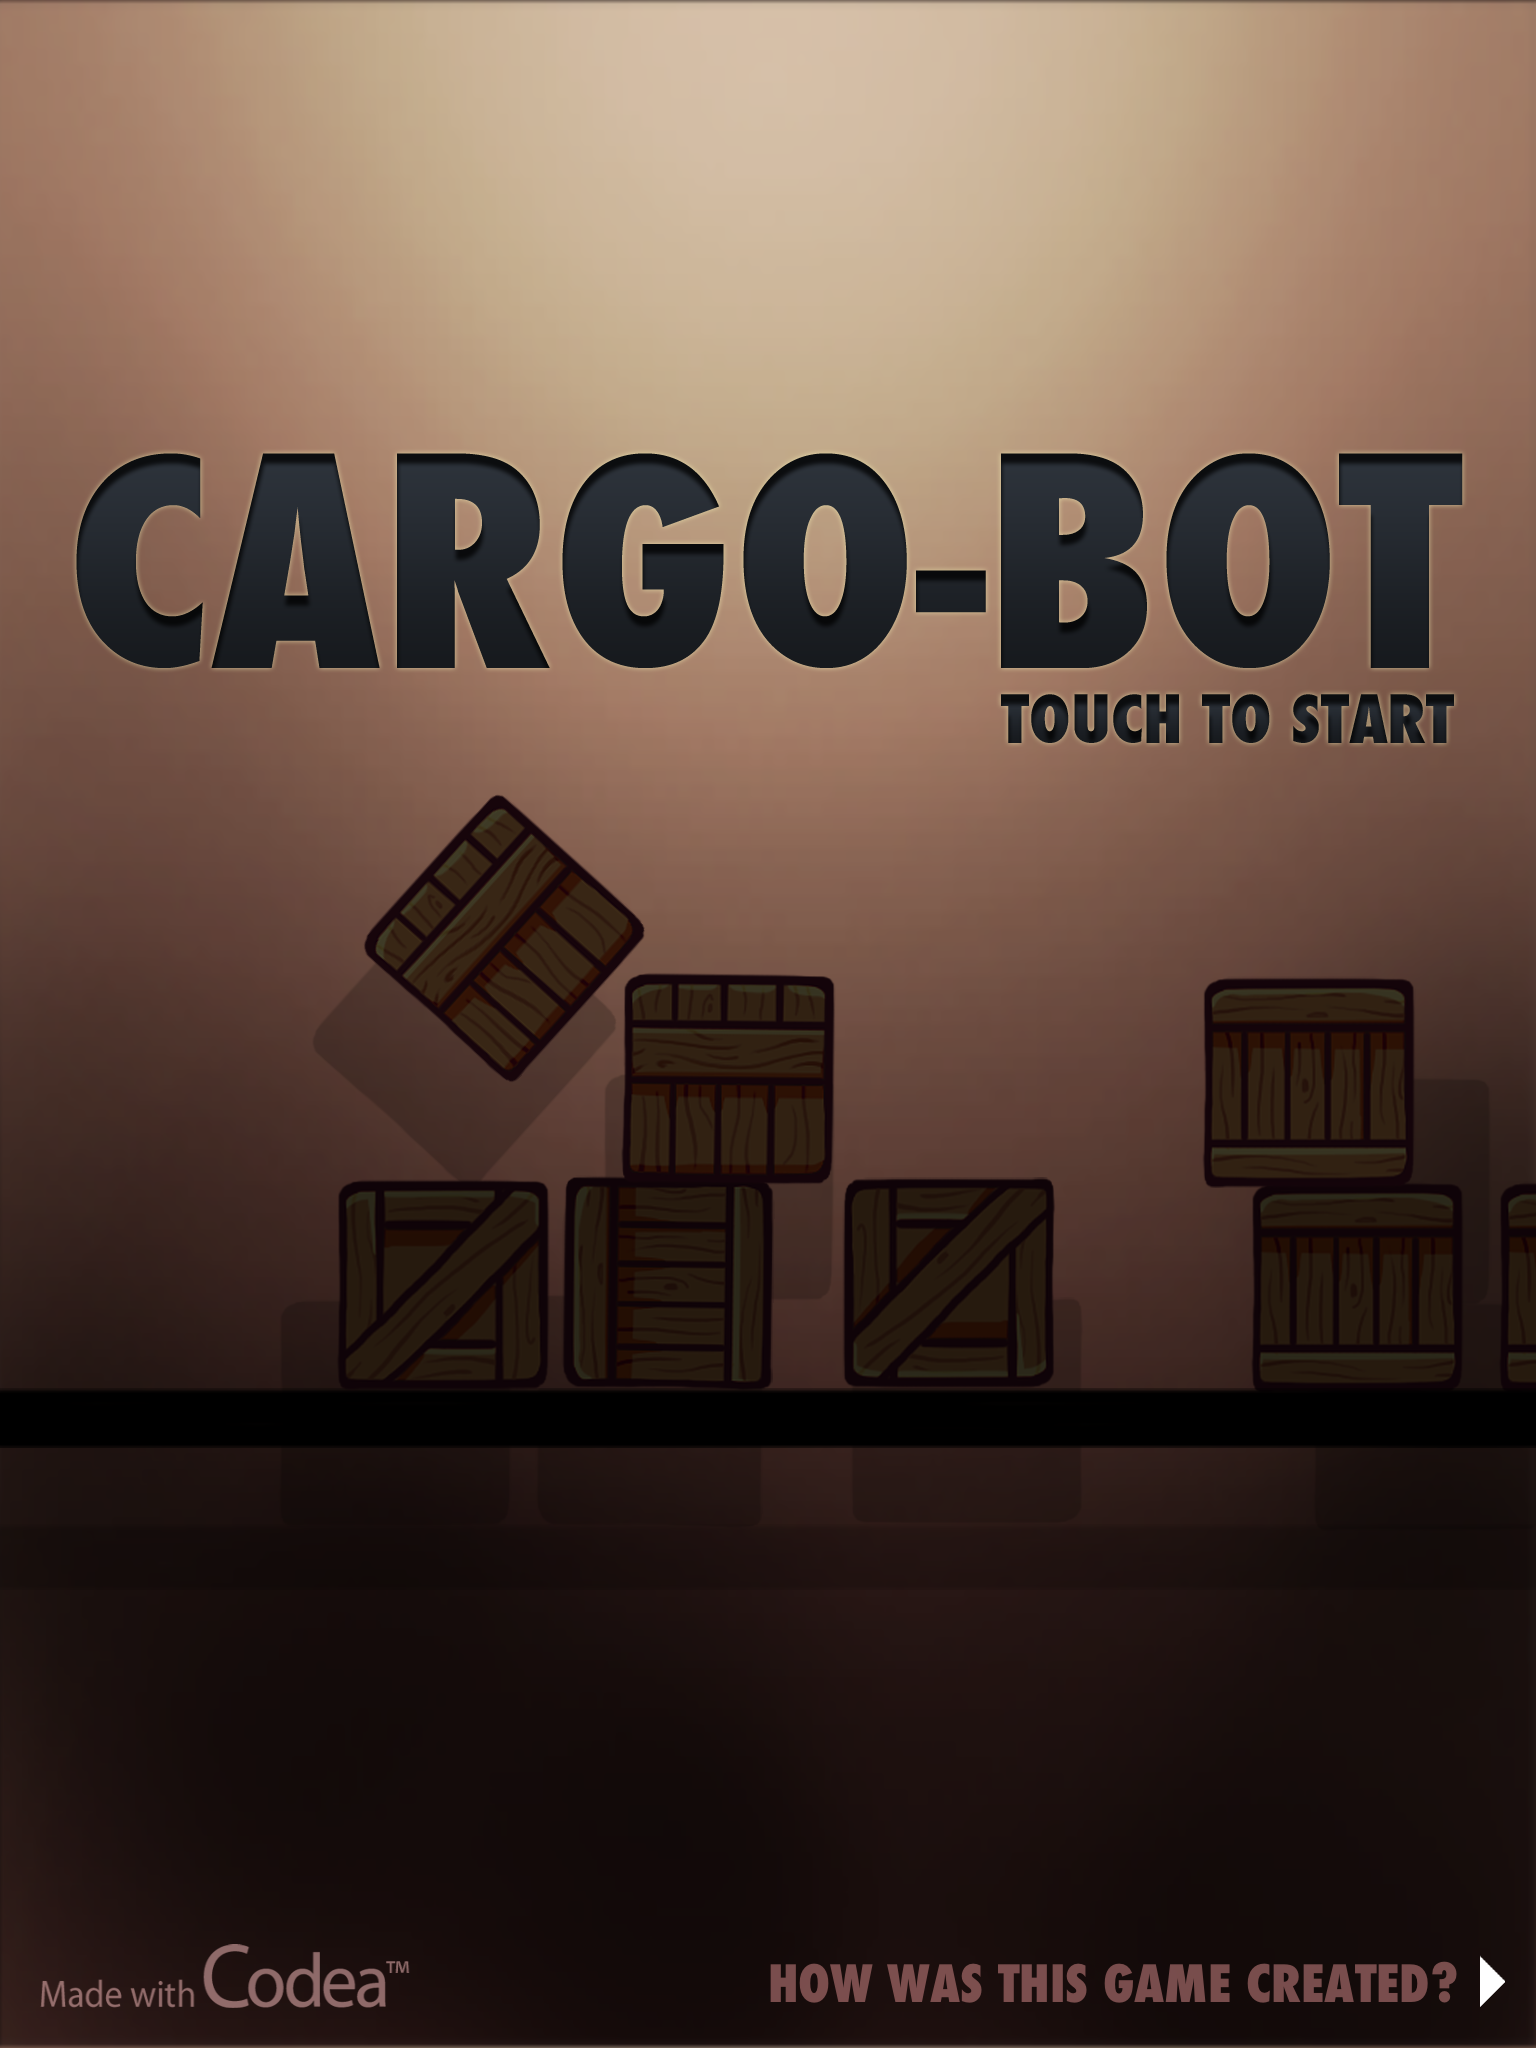 EdTech Tutorial: How To Use The App ‘Cargobot’ To Teach Programming